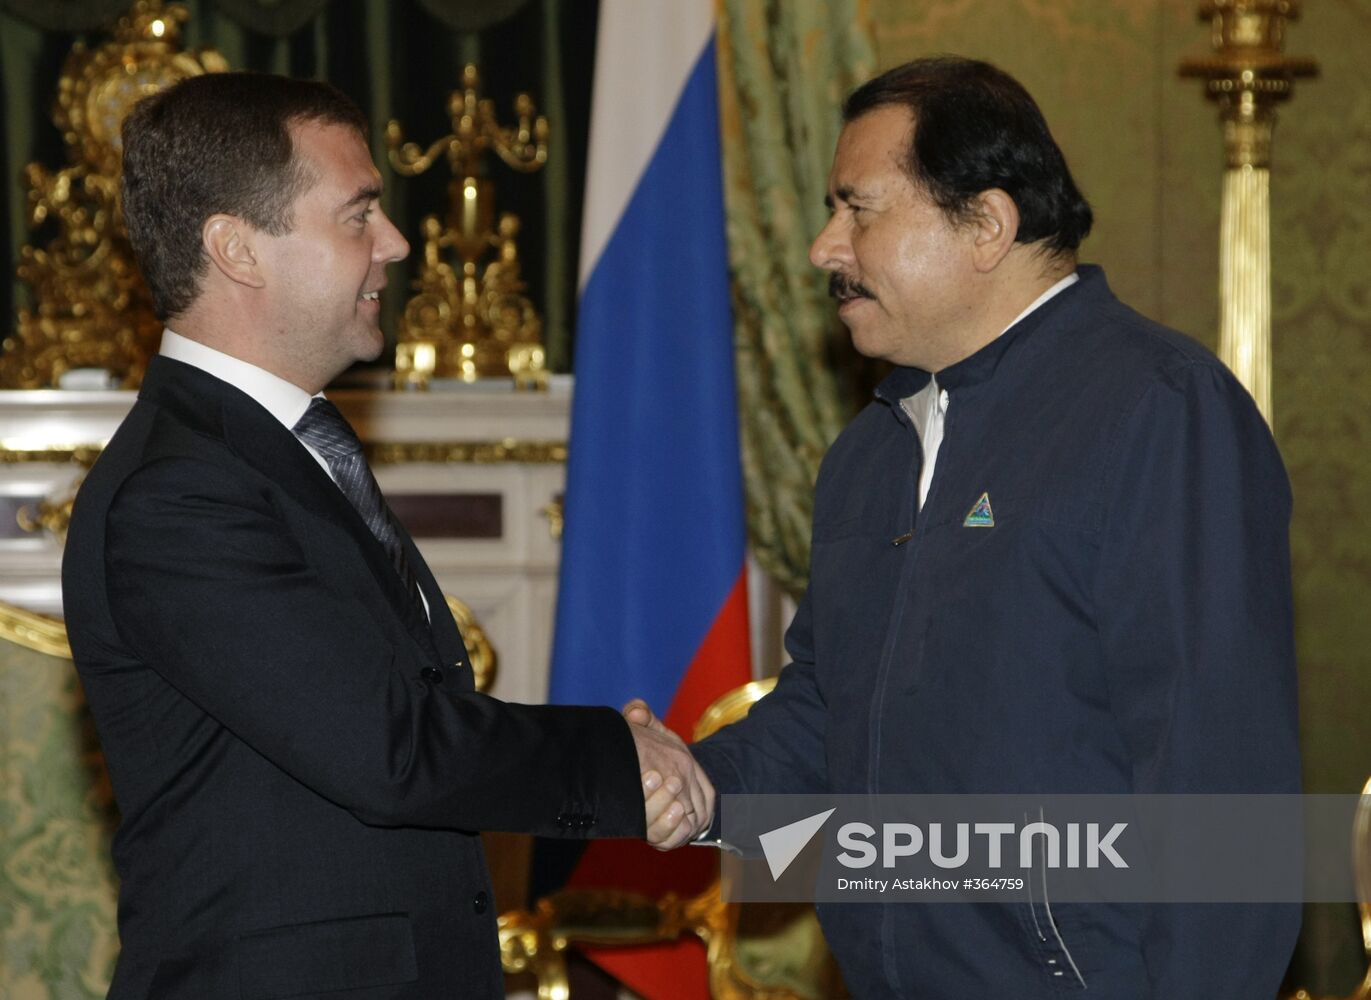 Official visit to Russia of the President of Nicaragua